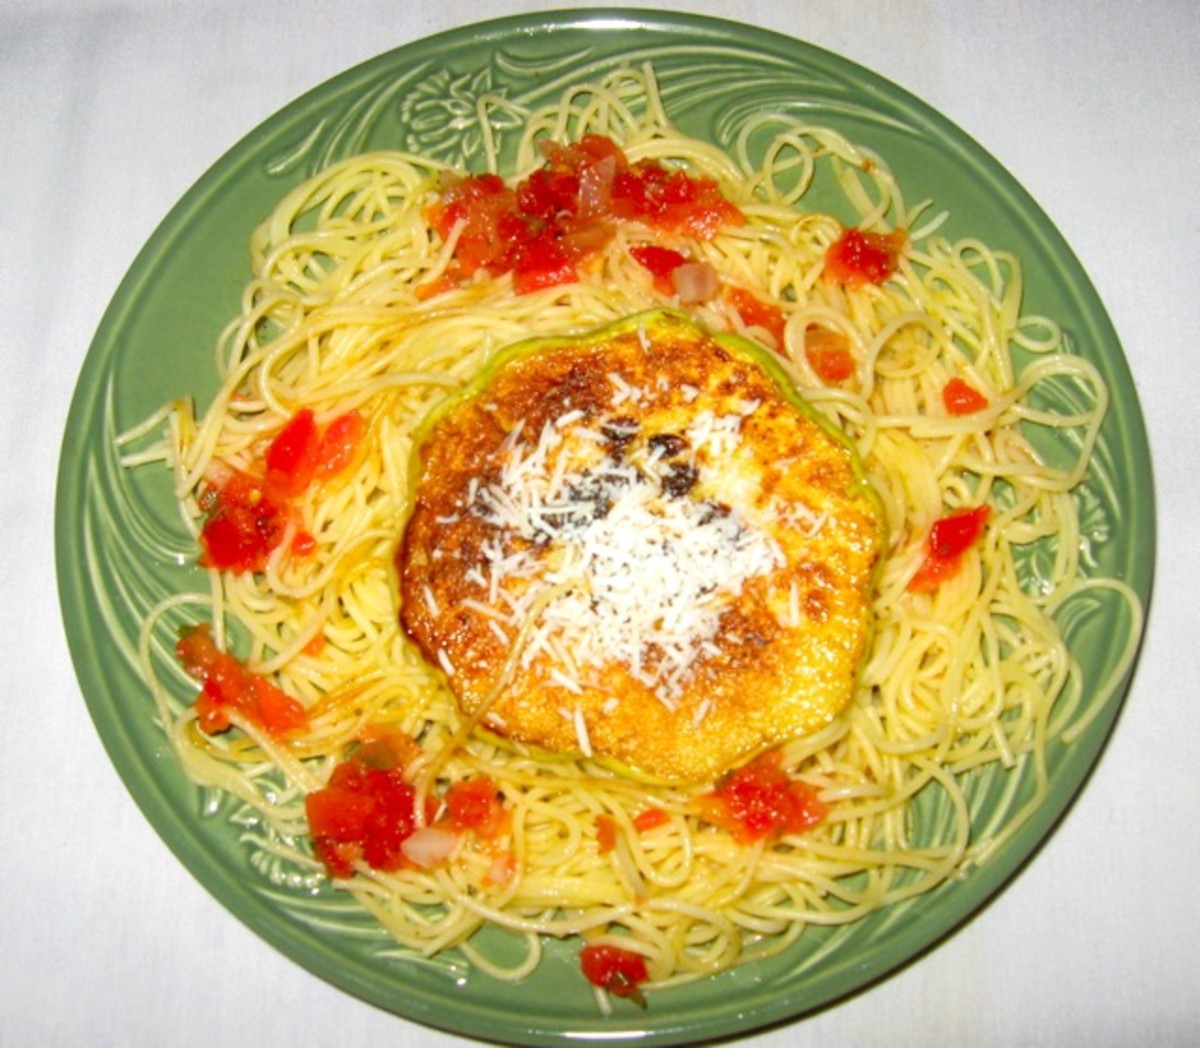 Sauted Patty Pan Squash on a bed of angel hair pasta with salsa garnish